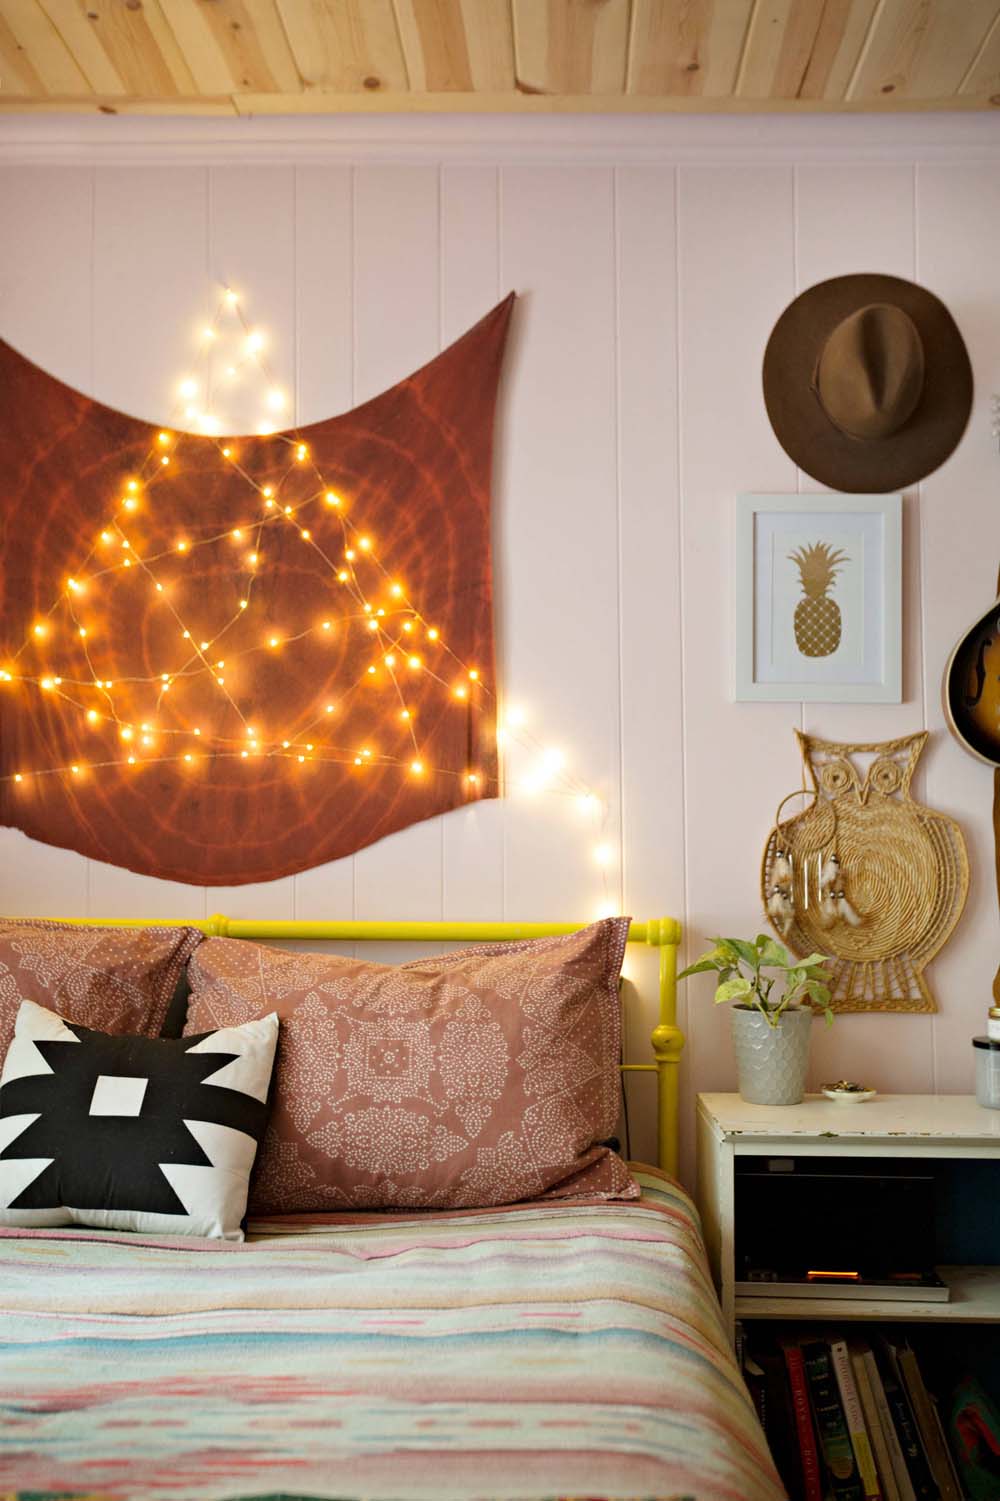 DIY Wall Hanging With Fairy Lights